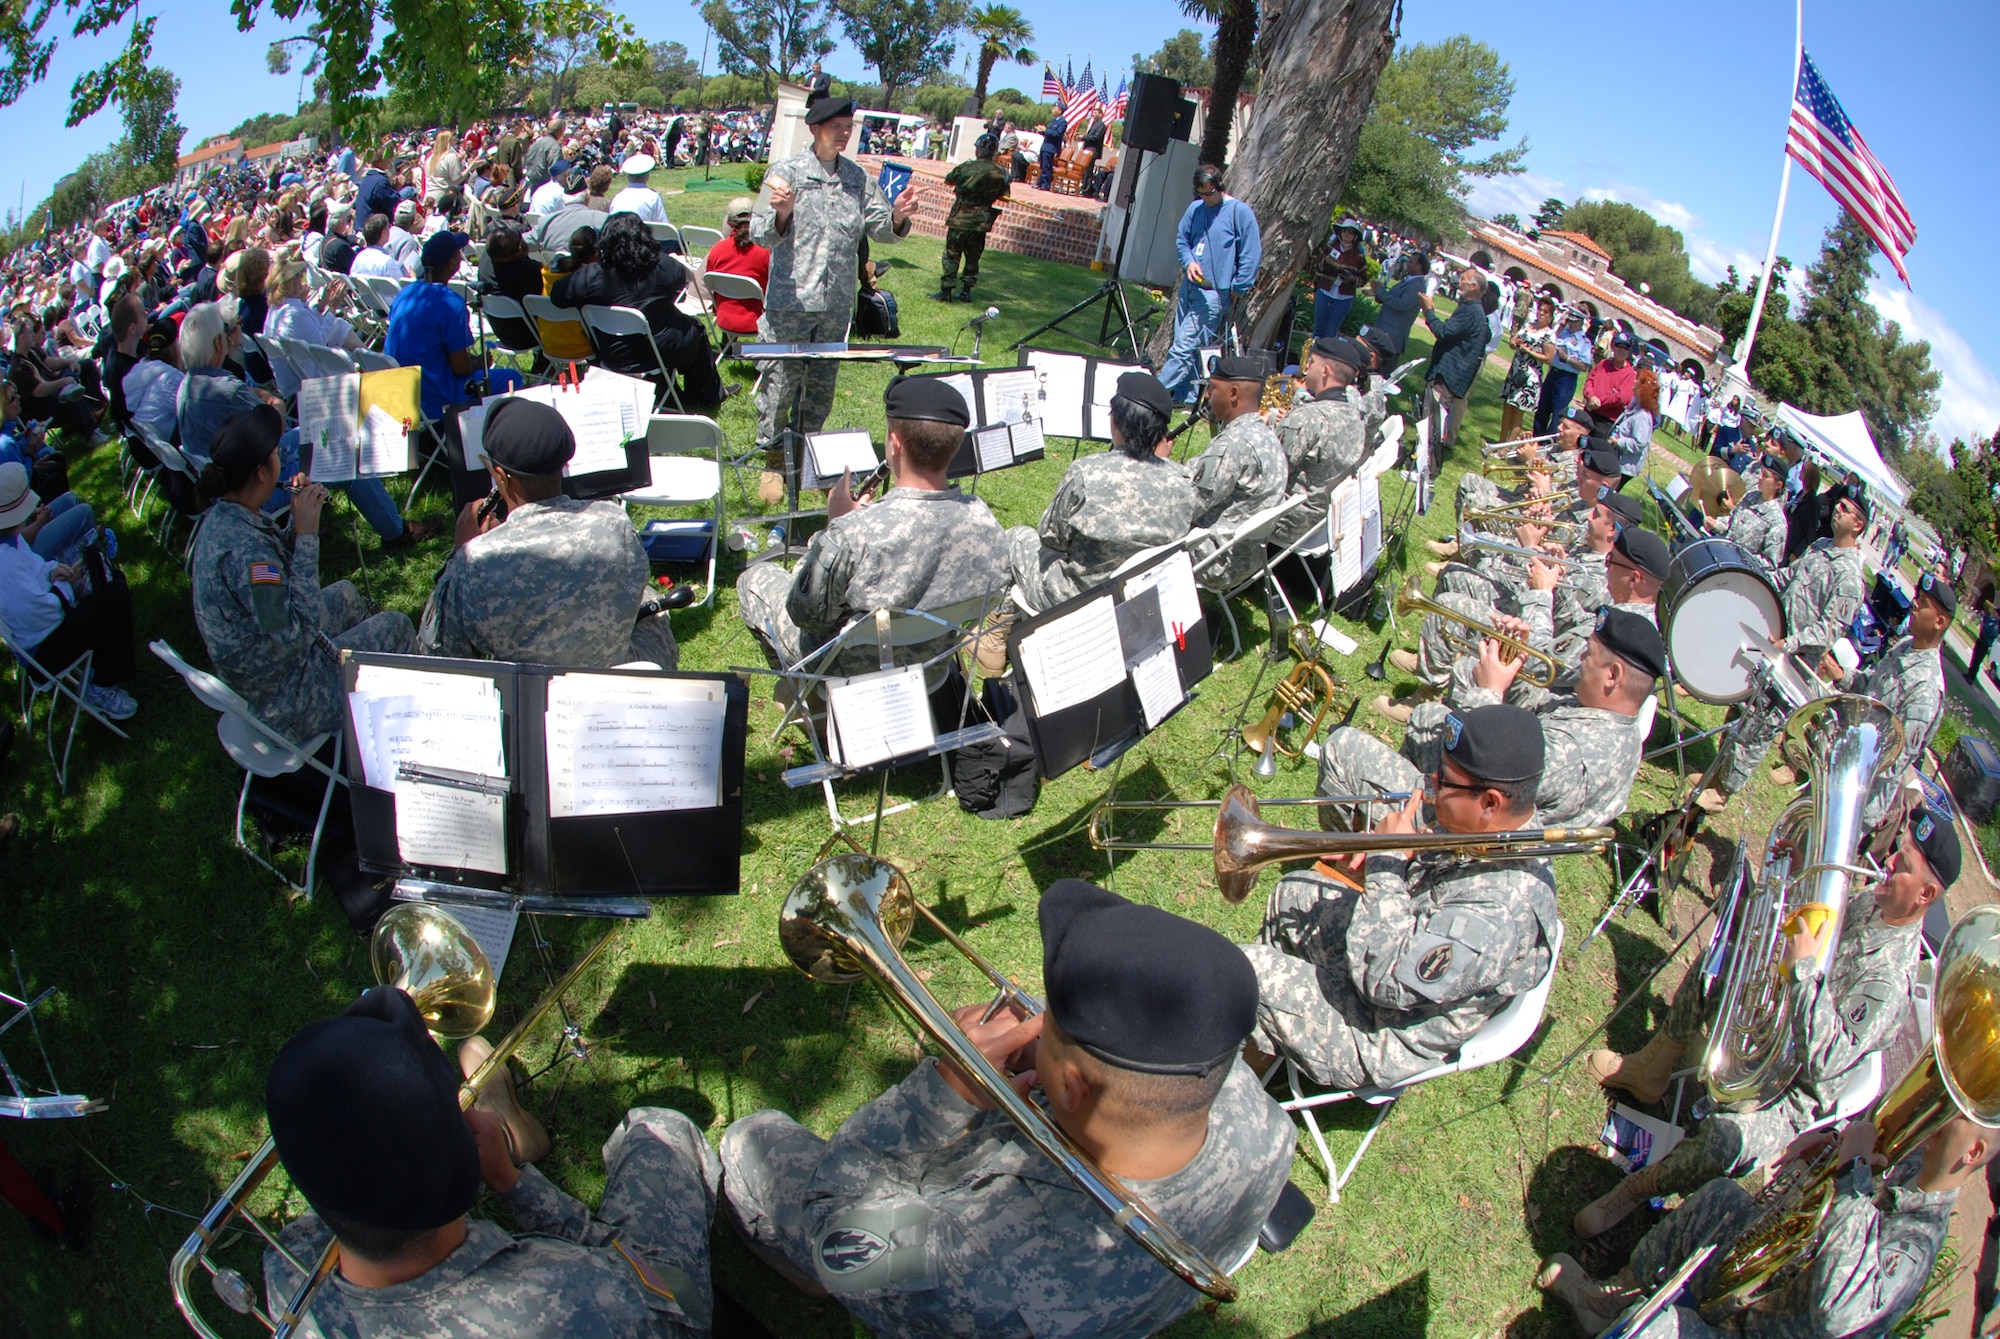 An Army Band plays while the audience looks on at the Memorial Day observance at the Los Angeles National Cemetery, May 16. (Photo courtesy of the Greater Los Angeles VA)